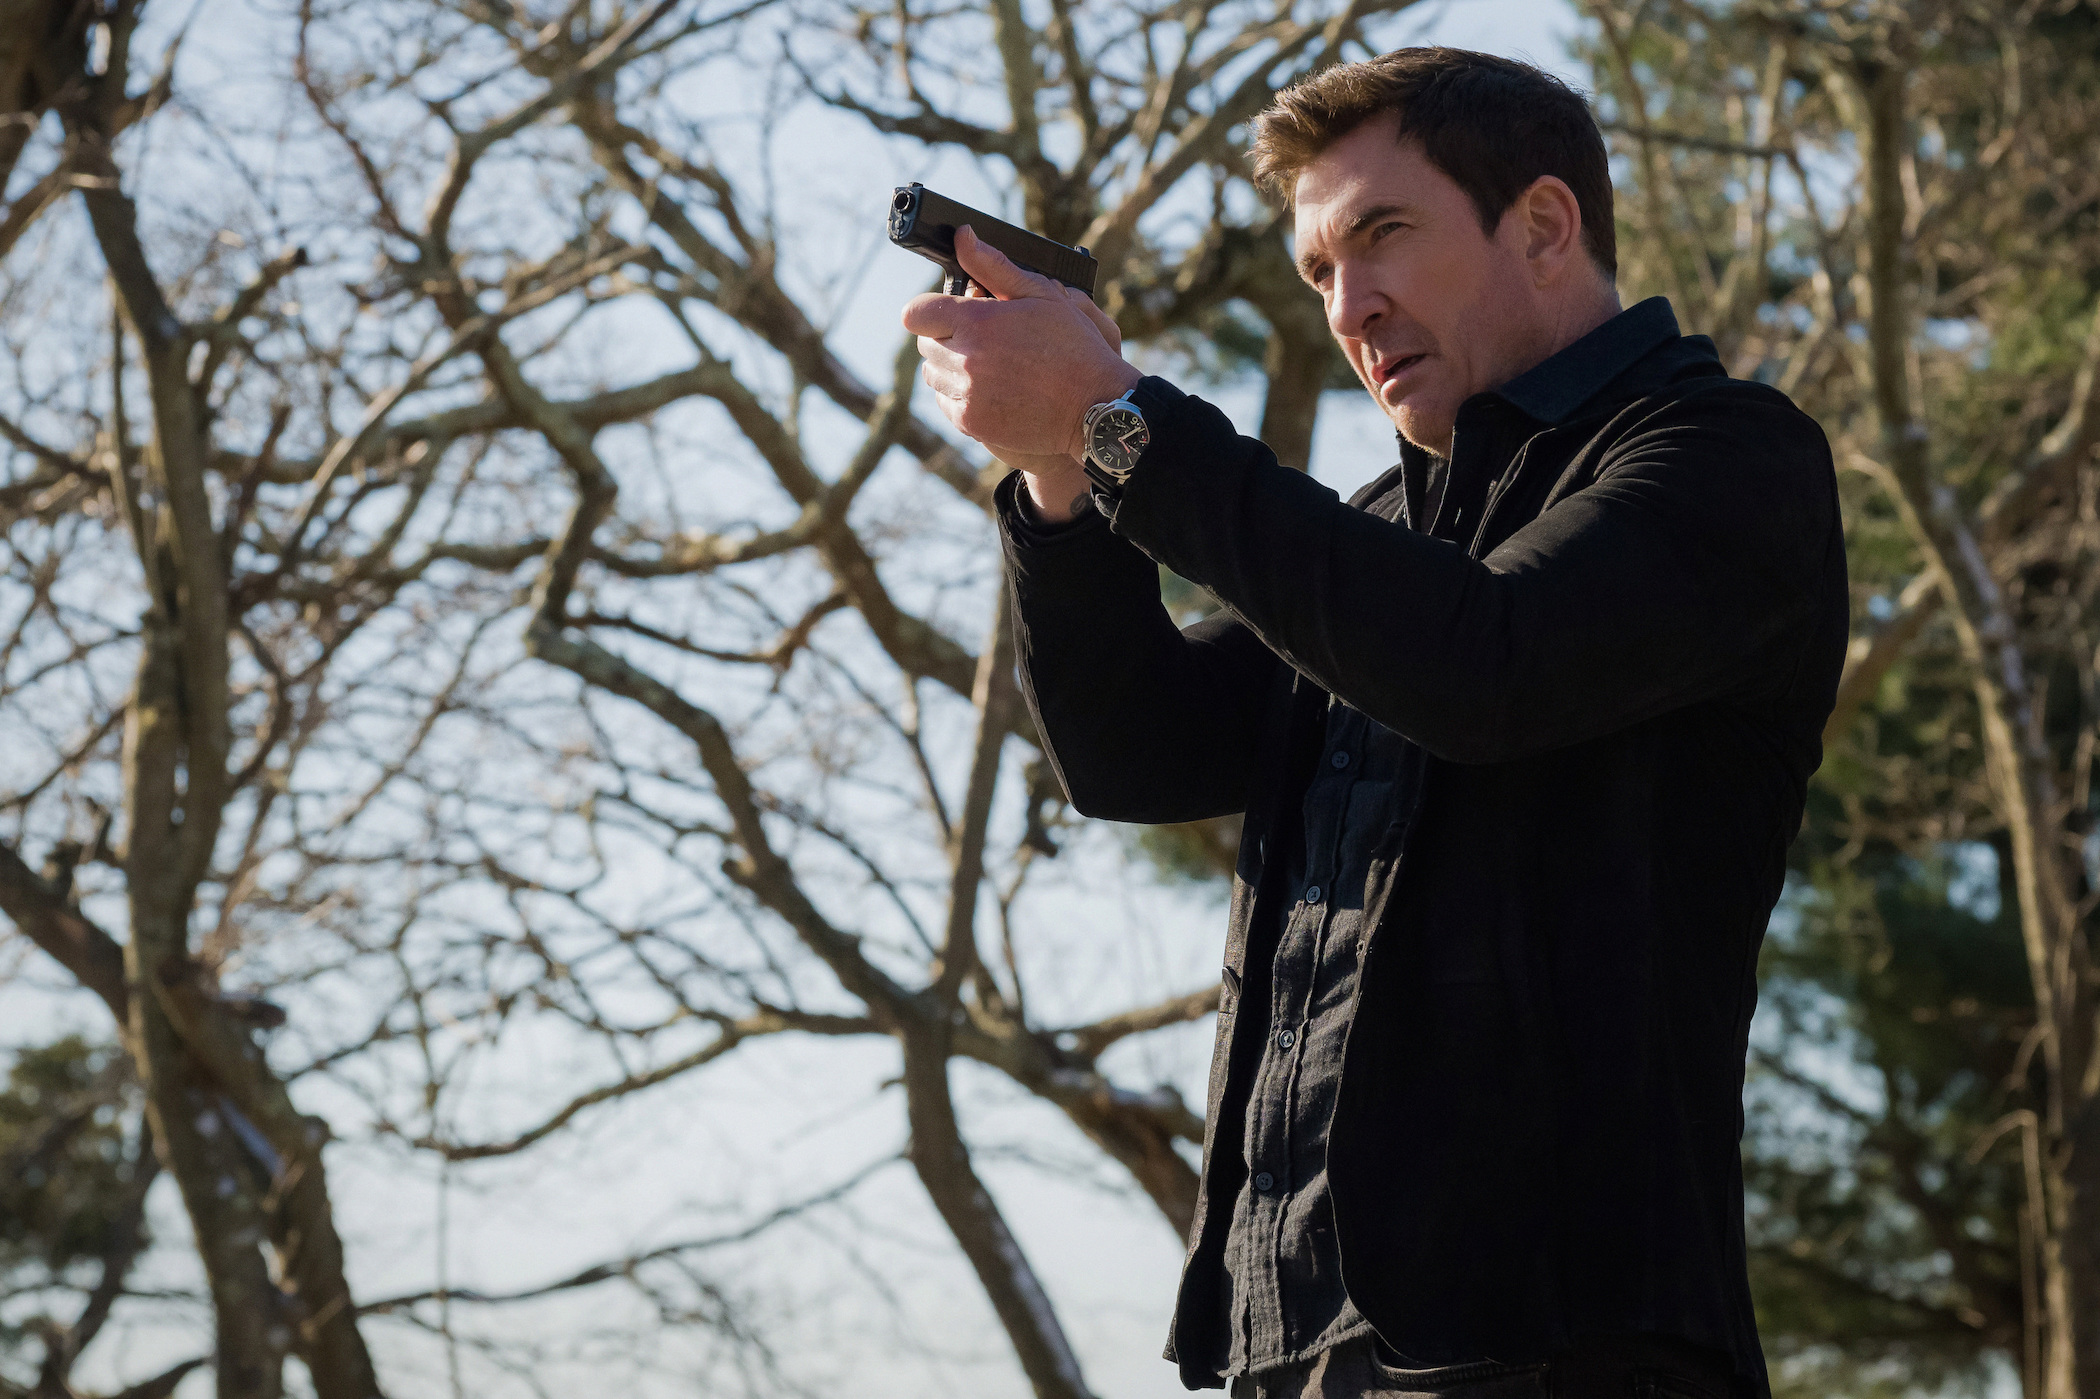 'FBI: Most Wanted' cast member Dylan McDermott as Remy Scott holding a gun ready to shoot outside